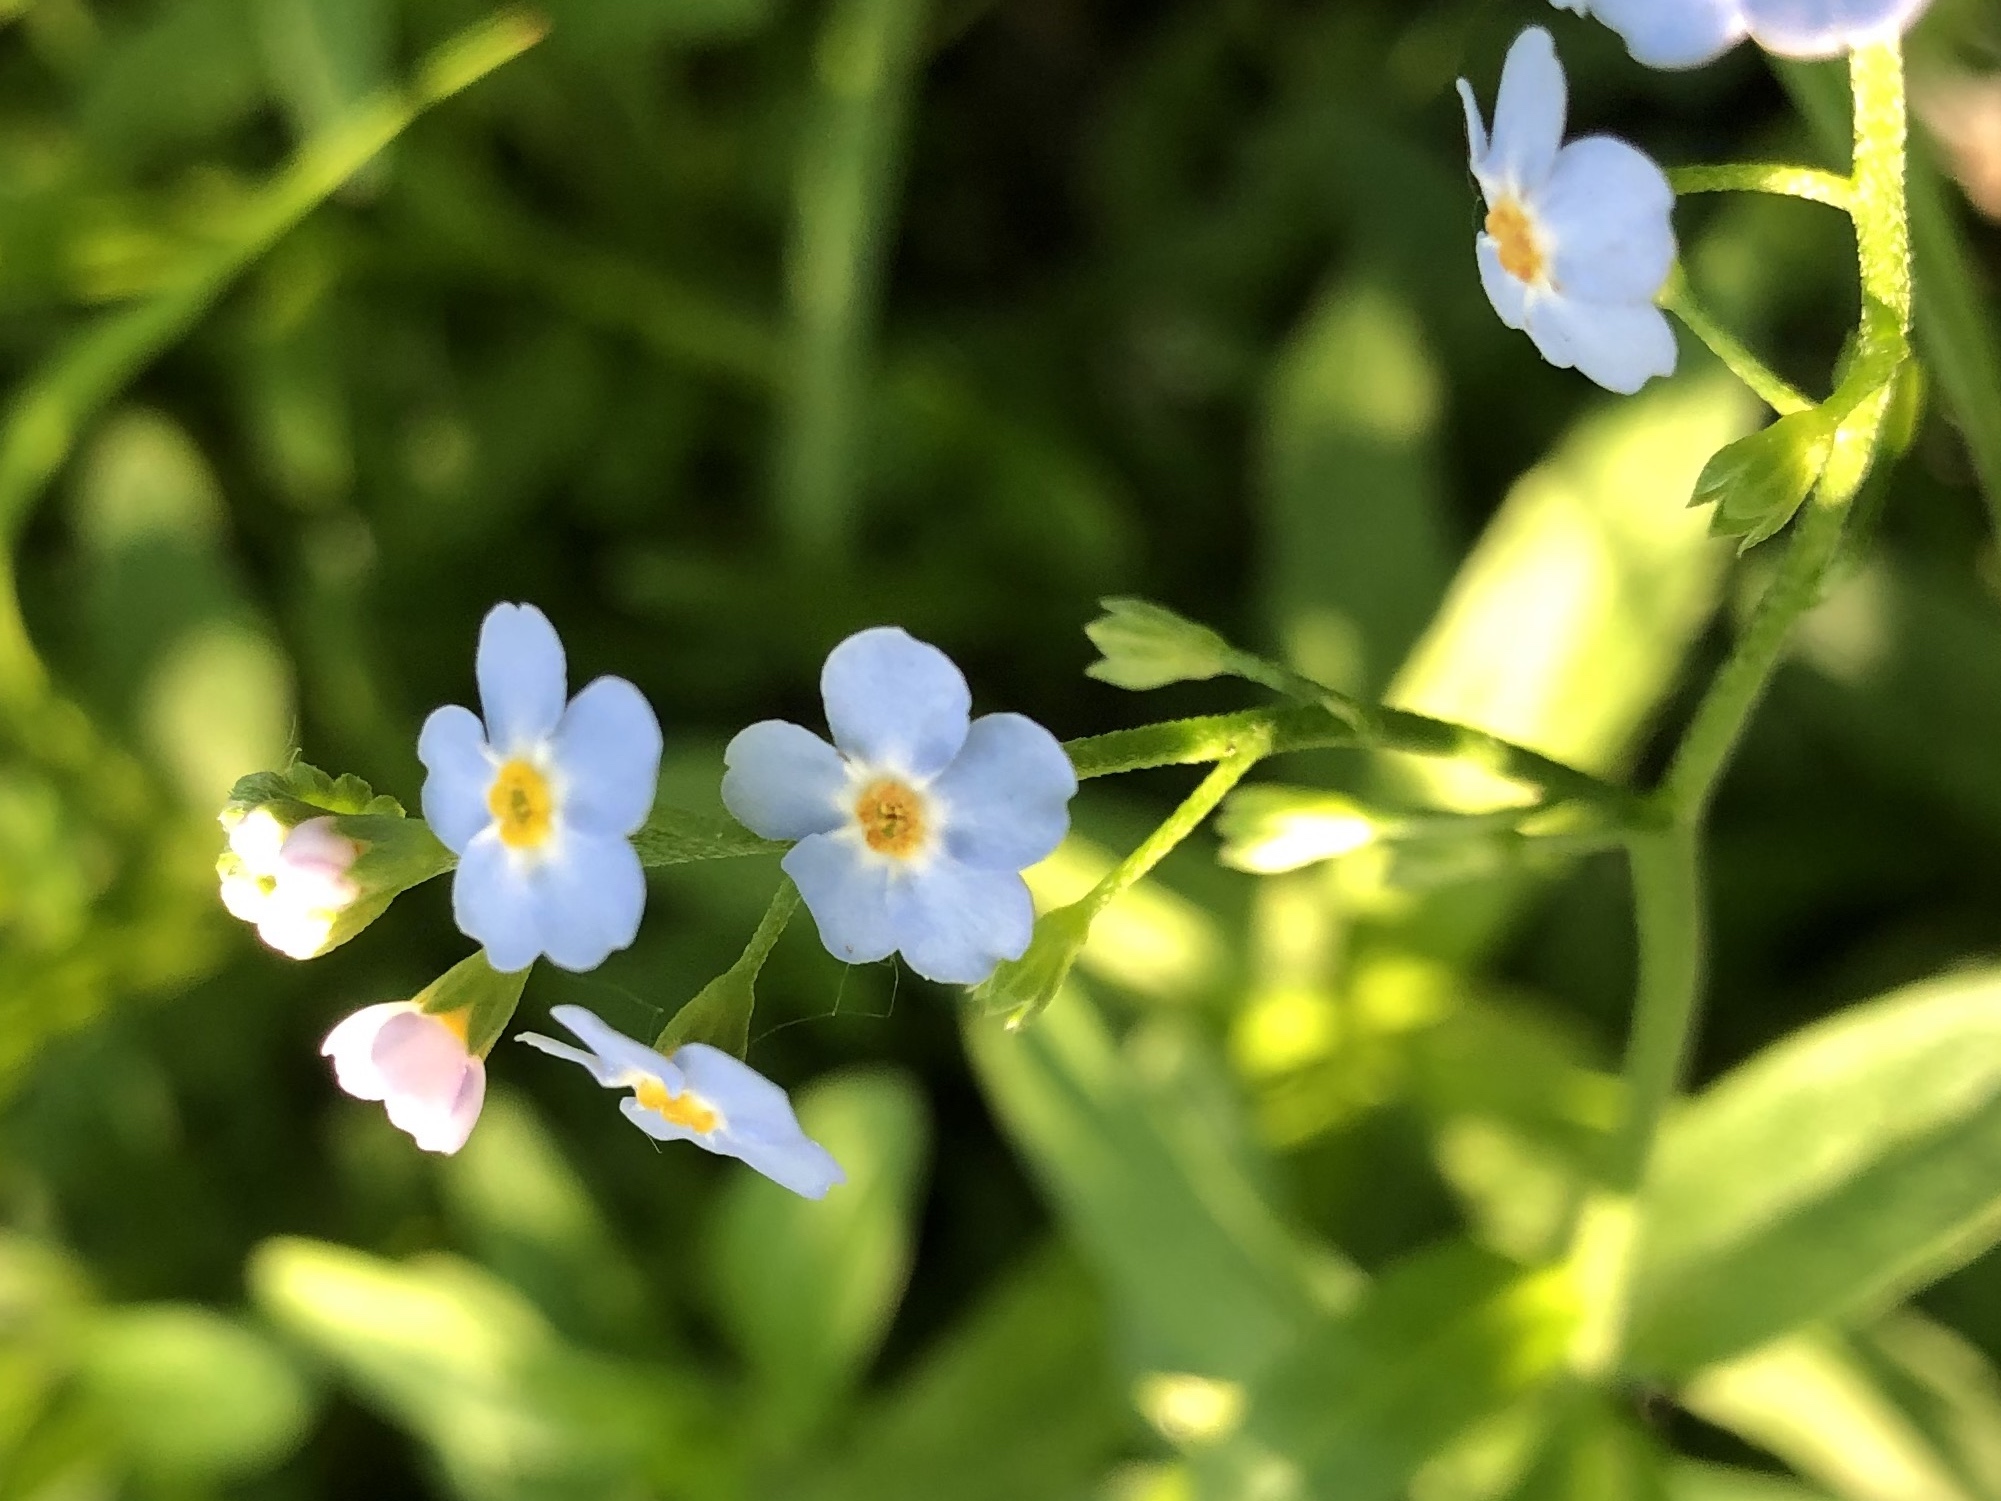 True Forget-me-not near cattails at Pickford Street stormwater outflow into Lake Wingra in Madison, Wisconsin on June 15, 2020.